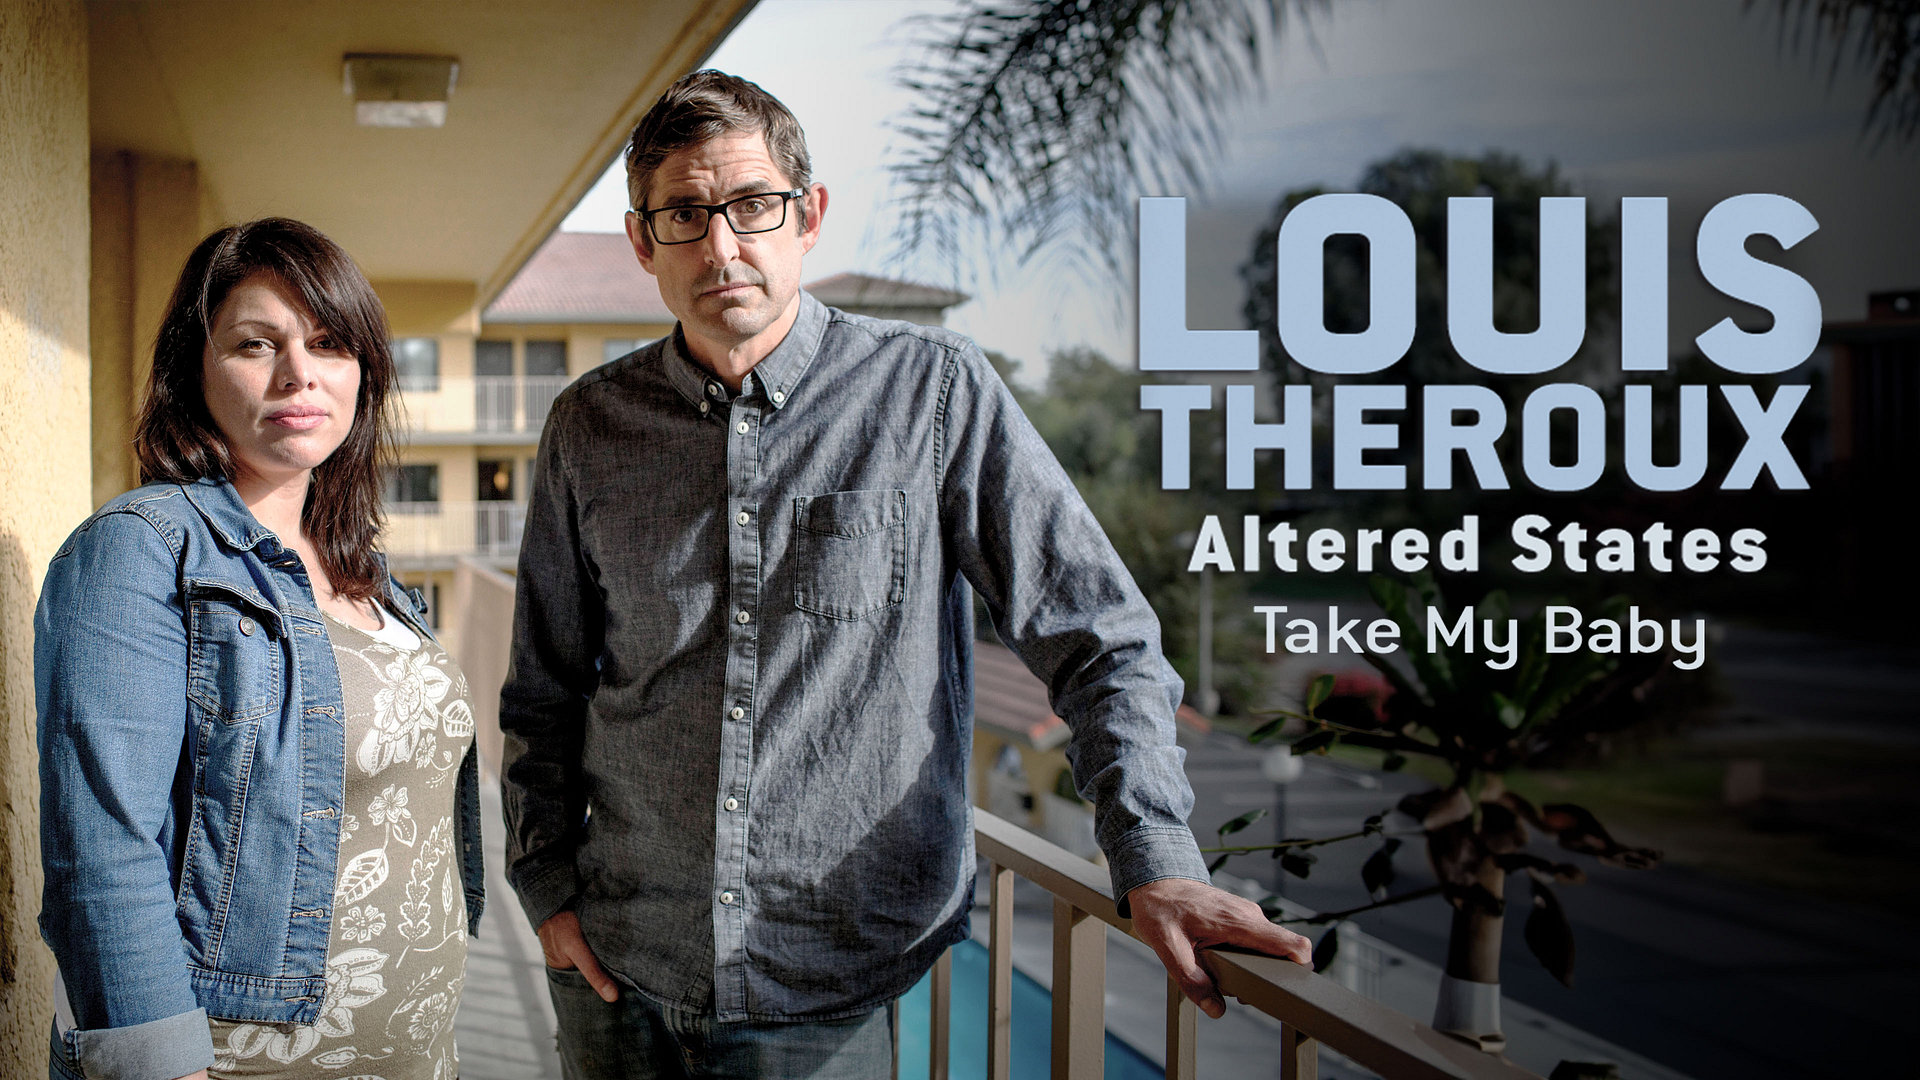 Louis Theroux: Forandrede stater - ta min baby